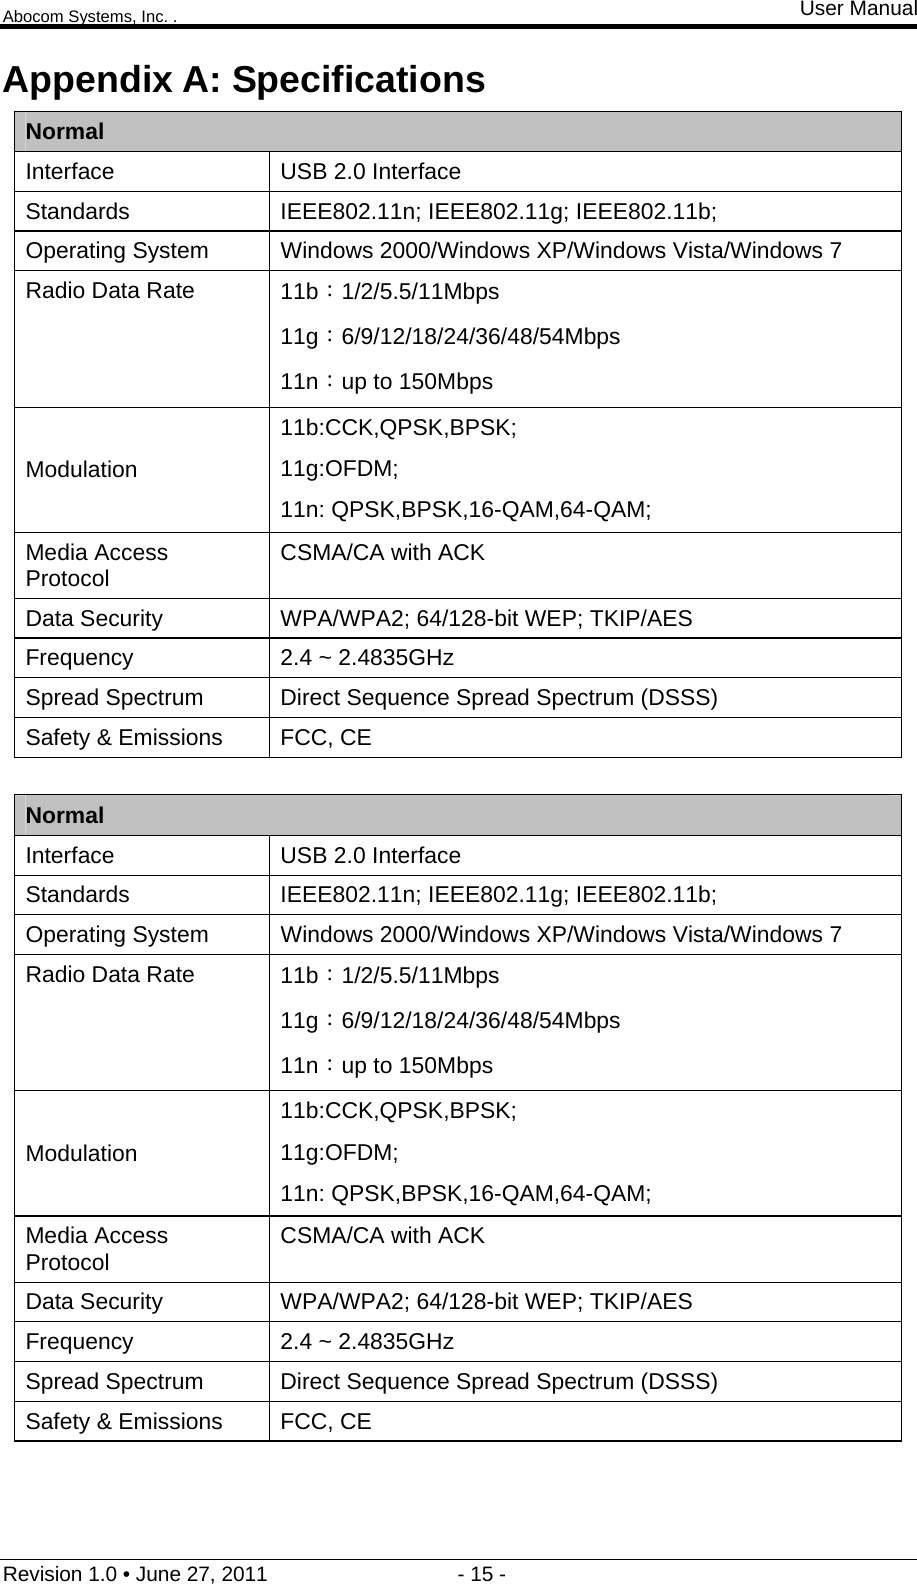 Abocom Systems, Inc. . User Manual Revision 1.0 • June 27, 2011                                 - 15 -                                                                Appendix A: Specifications Normal Interface  USB 2.0 Interface Standards  IEEE802.11n; IEEE802.11g; IEEE802.11b; Operating System  Windows 2000/Windows XP/Windows Vista/Windows 7 Radio Data Rate  11b：1/2/5.5/11Mbps 11g：6/9/12/18/24/36/48/54Mbps 11n：up to 150Mbps Modulation 11b:CCK,QPSK,BPSK; 11g:OFDM; 11n: QPSK,BPSK,16-QAM,64-QAM; Media Access Protocol  CSMA/CA with ACK Data Security  WPA/WPA2; 64/128-bit WEP; TKIP/AES Frequency  2.4 ~ 2.4835GHz Spread Spectrum  Direct Sequence Spread Spectrum (DSSS) Safety &amp; Emissions  FCC, CE  Normal Interface  USB 2.0 Interface Standards  IEEE802.11n; IEEE802.11g; IEEE802.11b; Operating System  Windows 2000/Windows XP/Windows Vista/Windows 7 Radio Data Rate  11b：1/2/5.5/11Mbps 11g：6/9/12/18/24/36/48/54Mbps 11n：up to 150Mbps Modulation 11b:CCK,QPSK,BPSK; 11g:OFDM; 11n: QPSK,BPSK,16-QAM,64-QAM; Media Access Protocol  CSMA/CA with ACK Data Security  WPA/WPA2; 64/128-bit WEP; TKIP/AES Frequency  2.4 ~ 2.4835GHz Spread Spectrum  Direct Sequence Spread Spectrum (DSSS) Safety &amp; Emissions  FCC, CE  